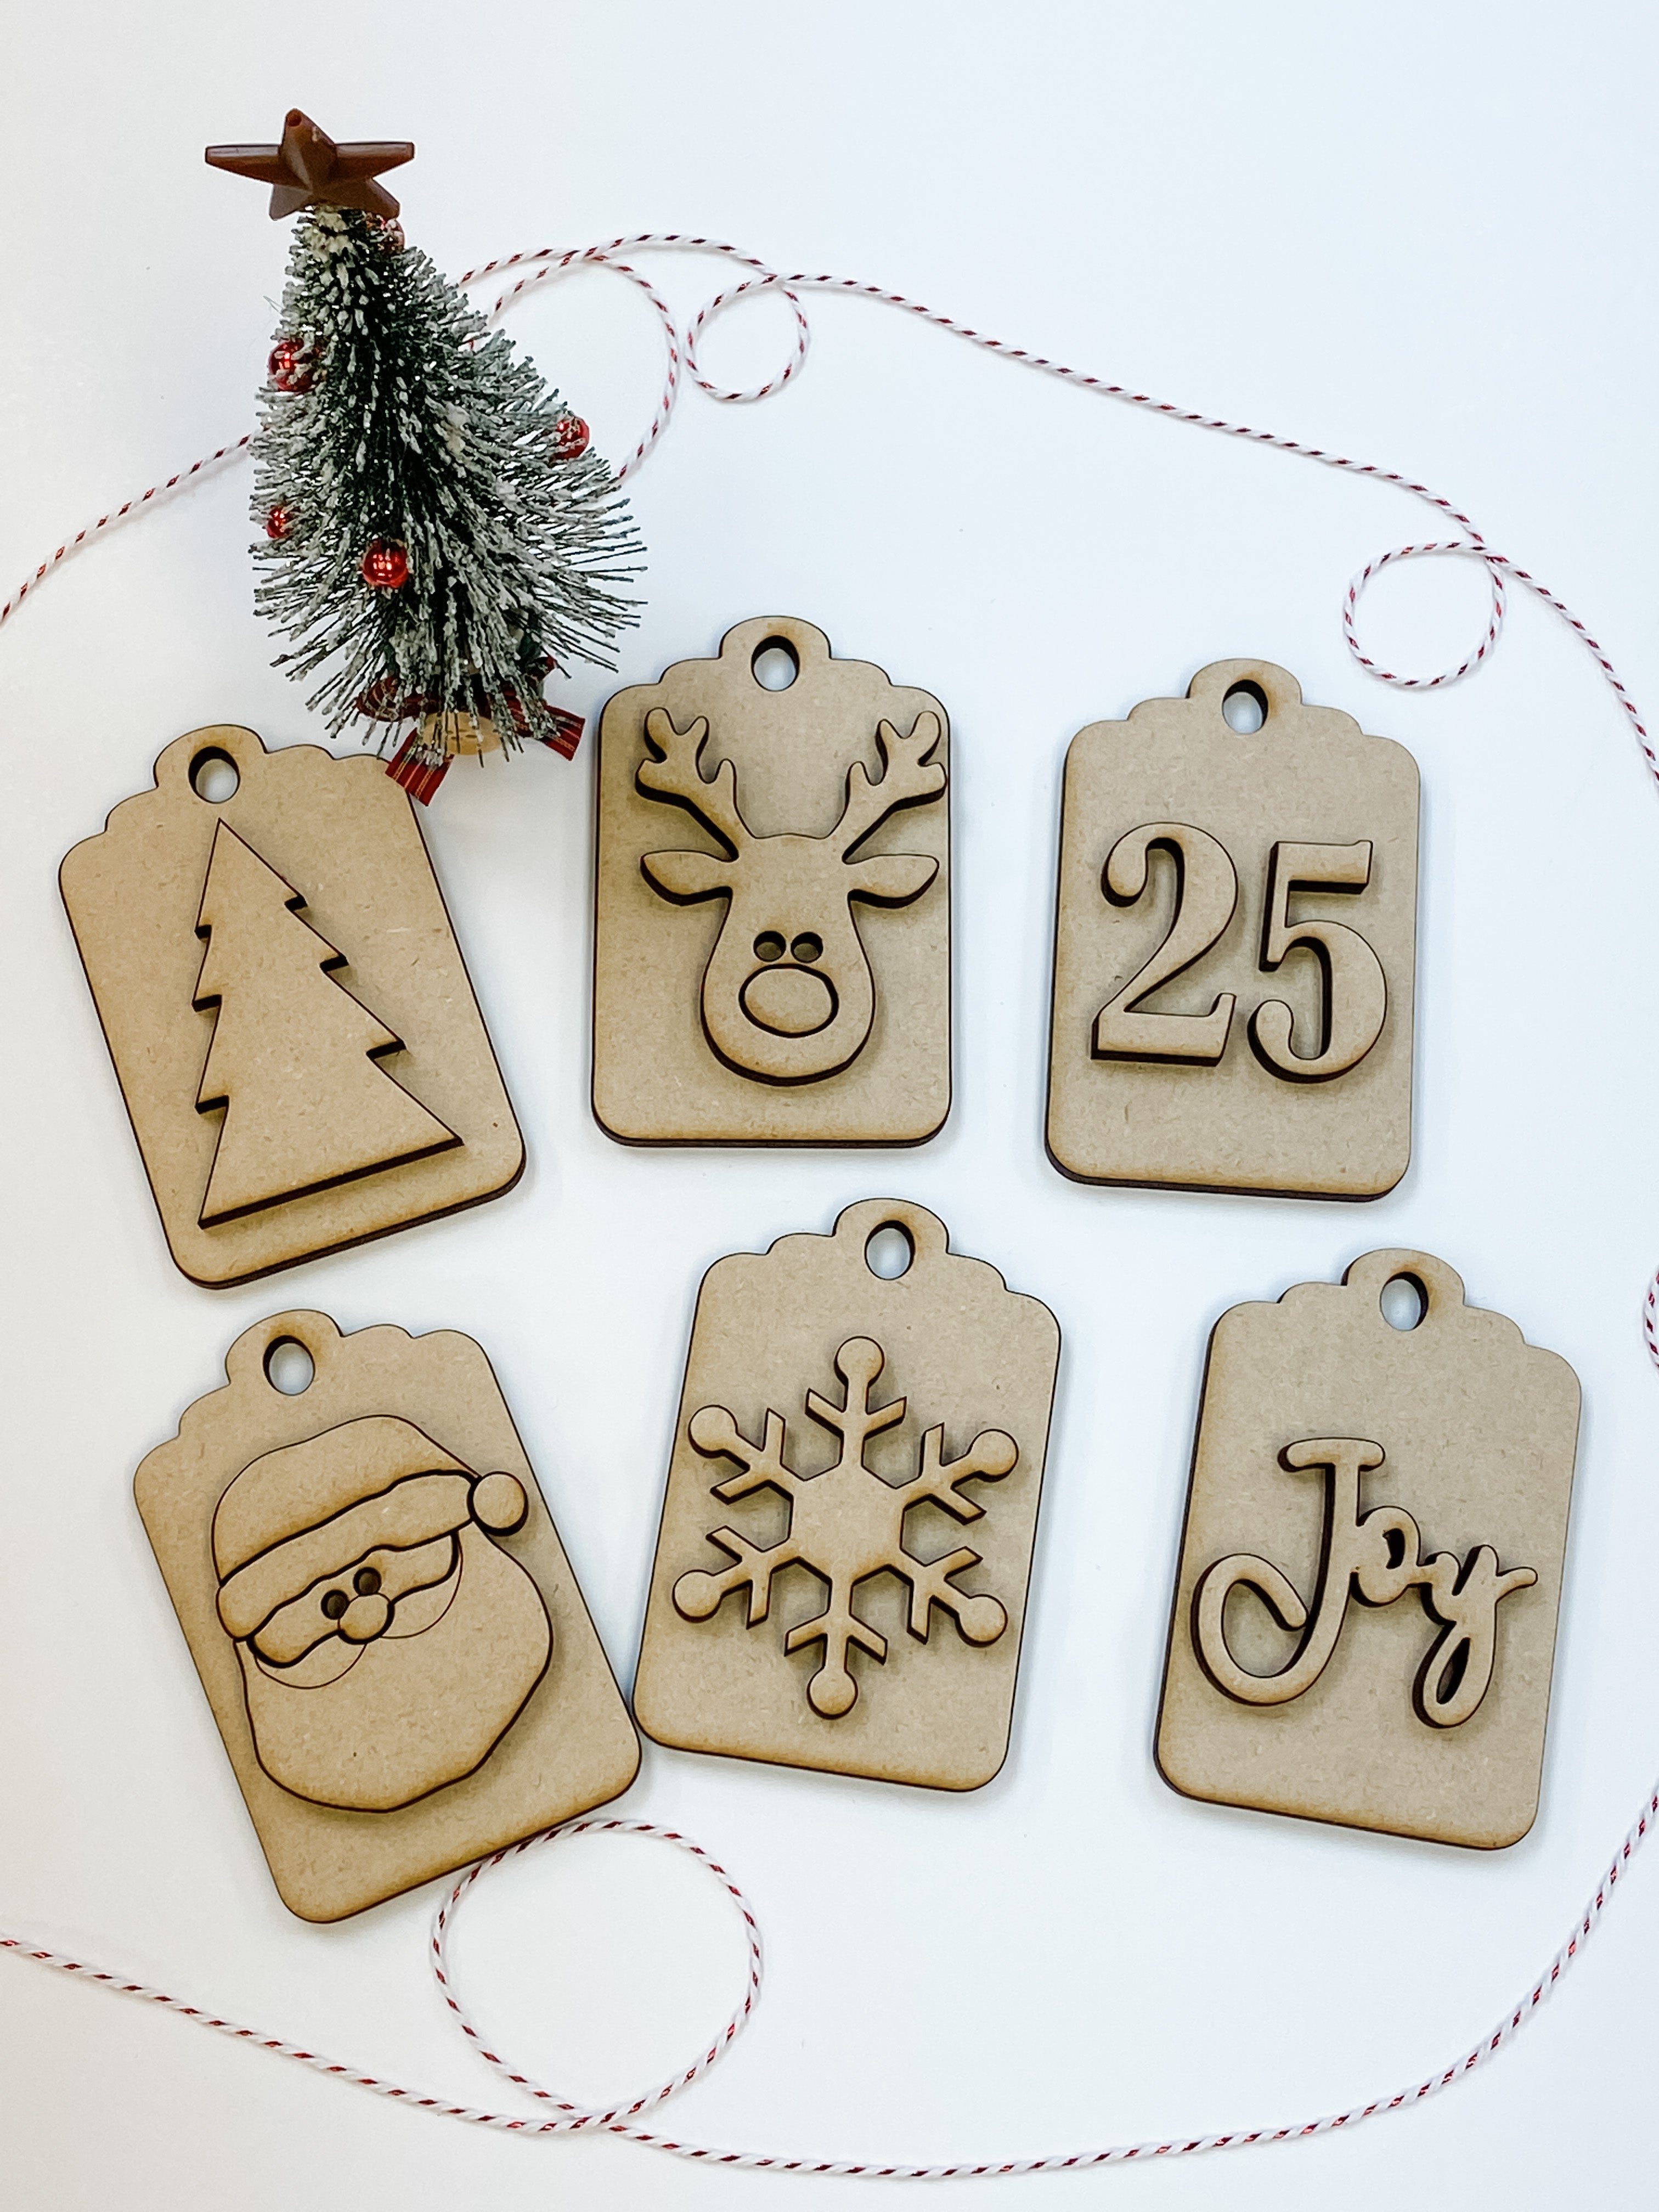 How to make wooden Christmas ornaments and tags 